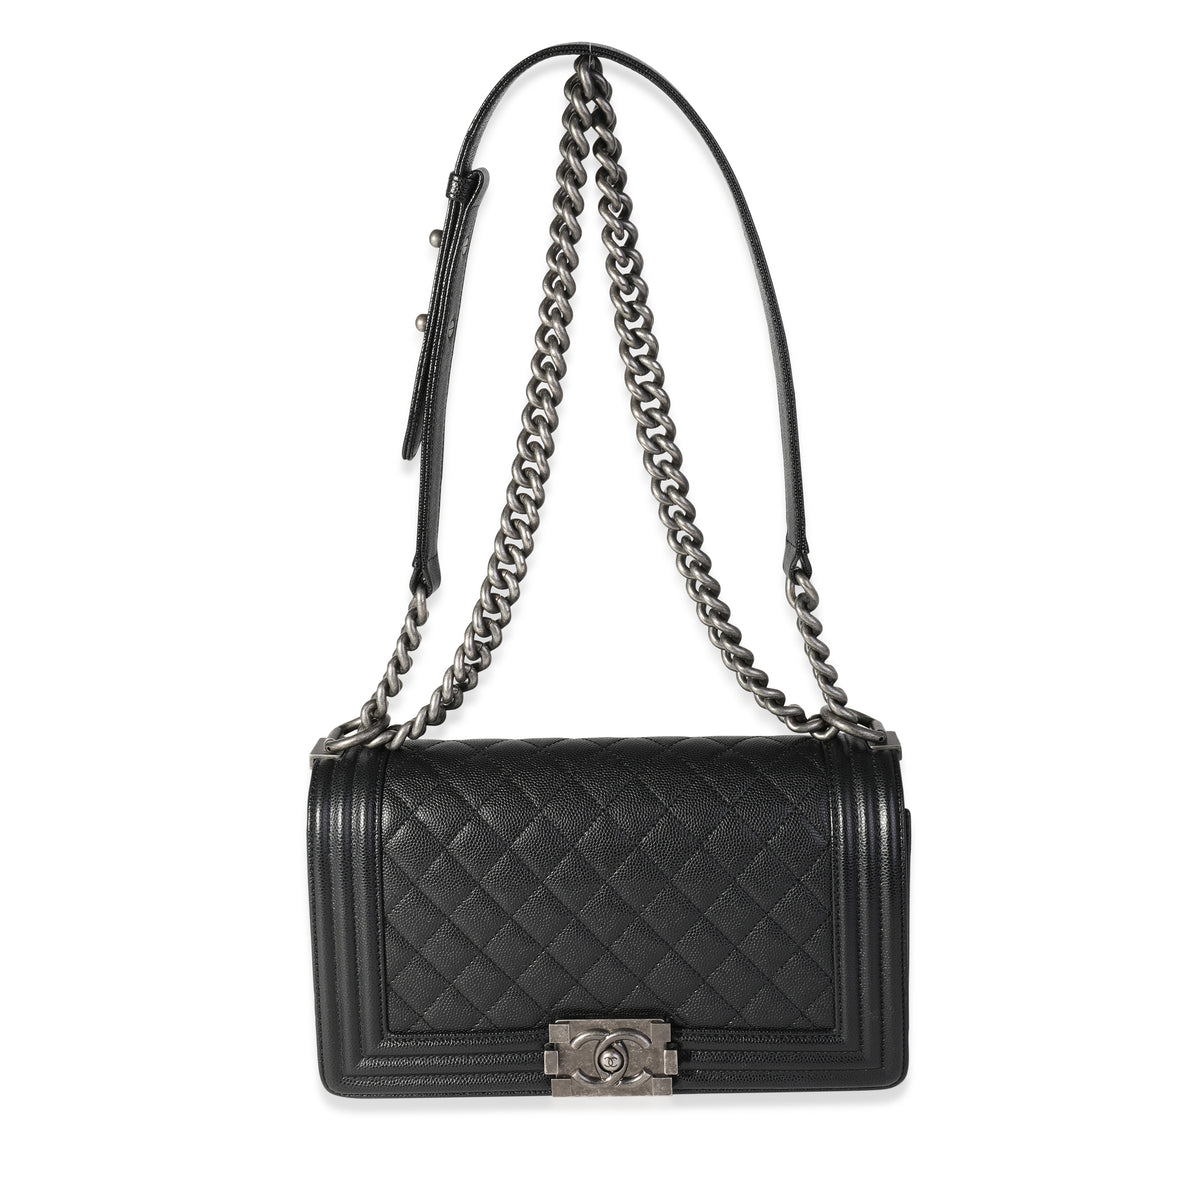 Chanel Black Quilted Leather Old Medium Boy Bag